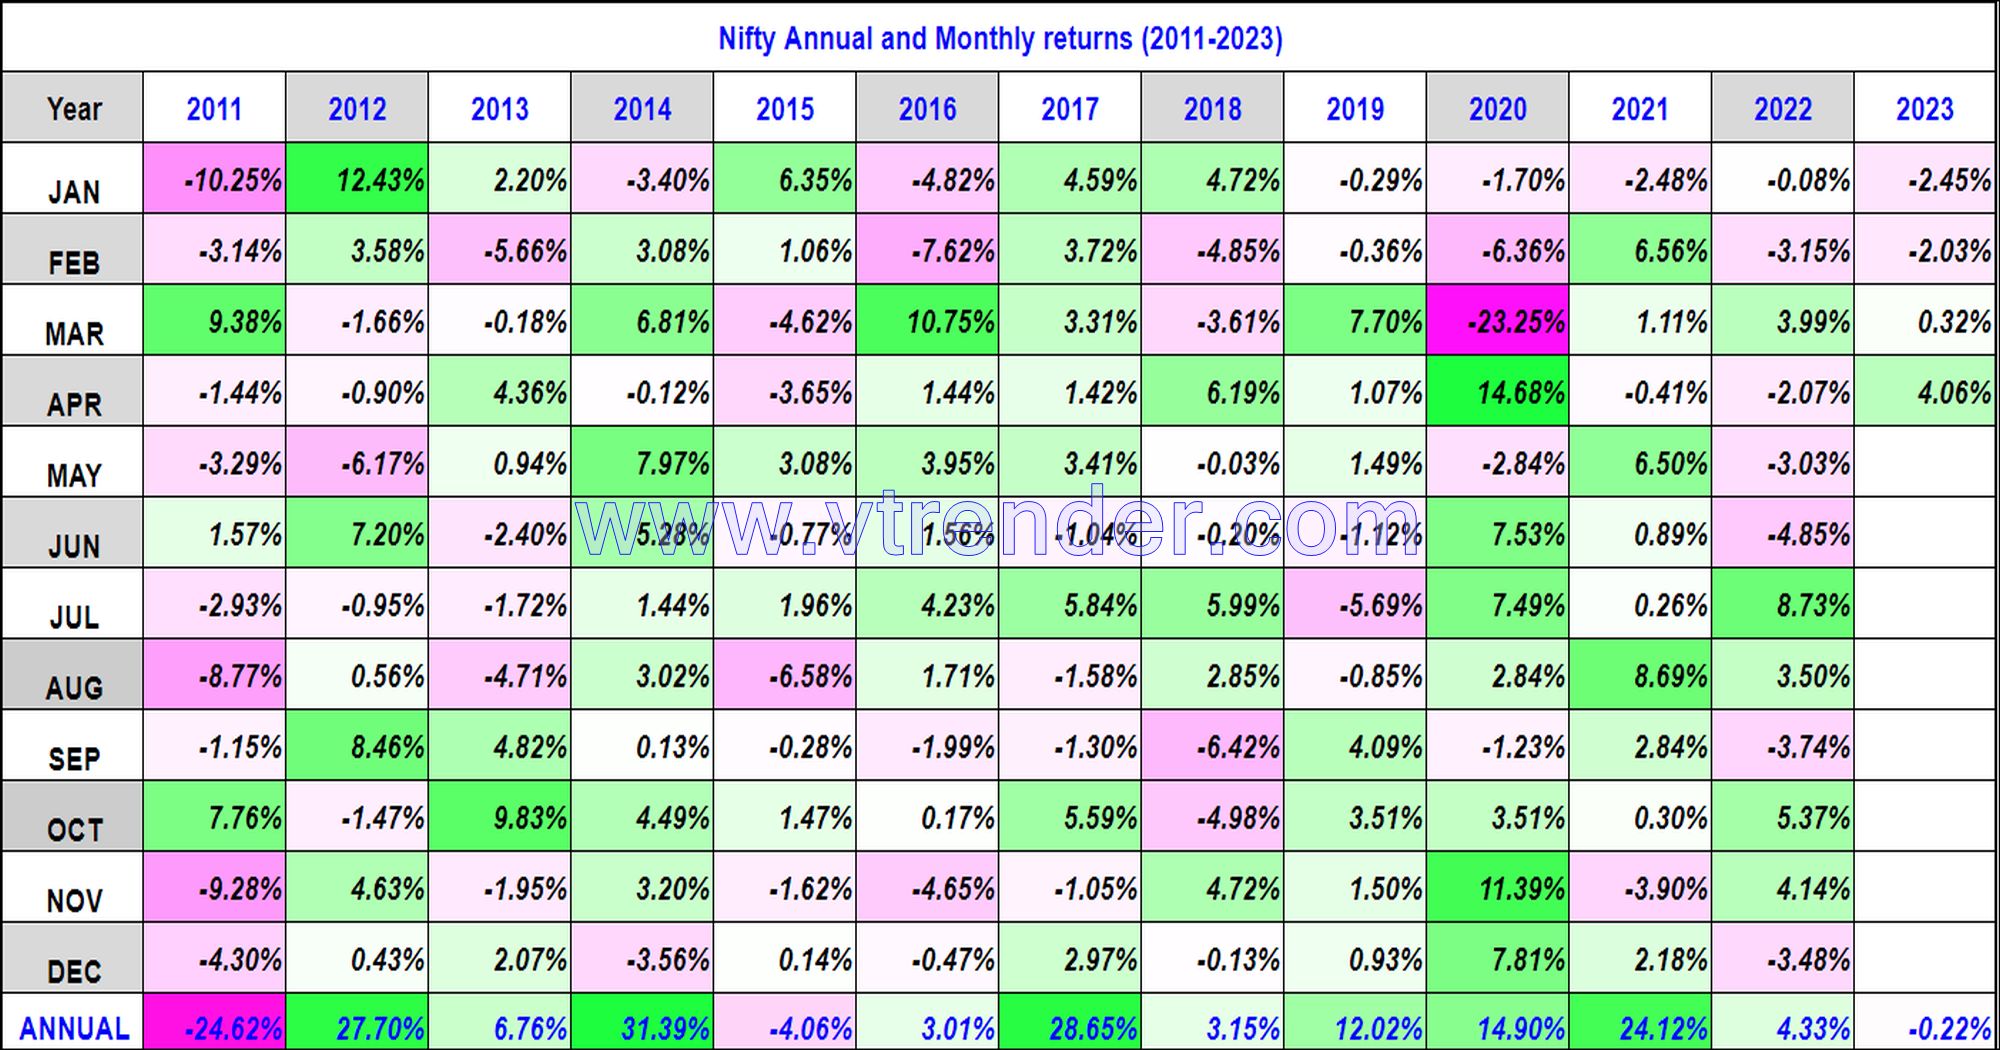 Nifty 50 Monthly and Annual returns (19912023) updated 28th APR 2023